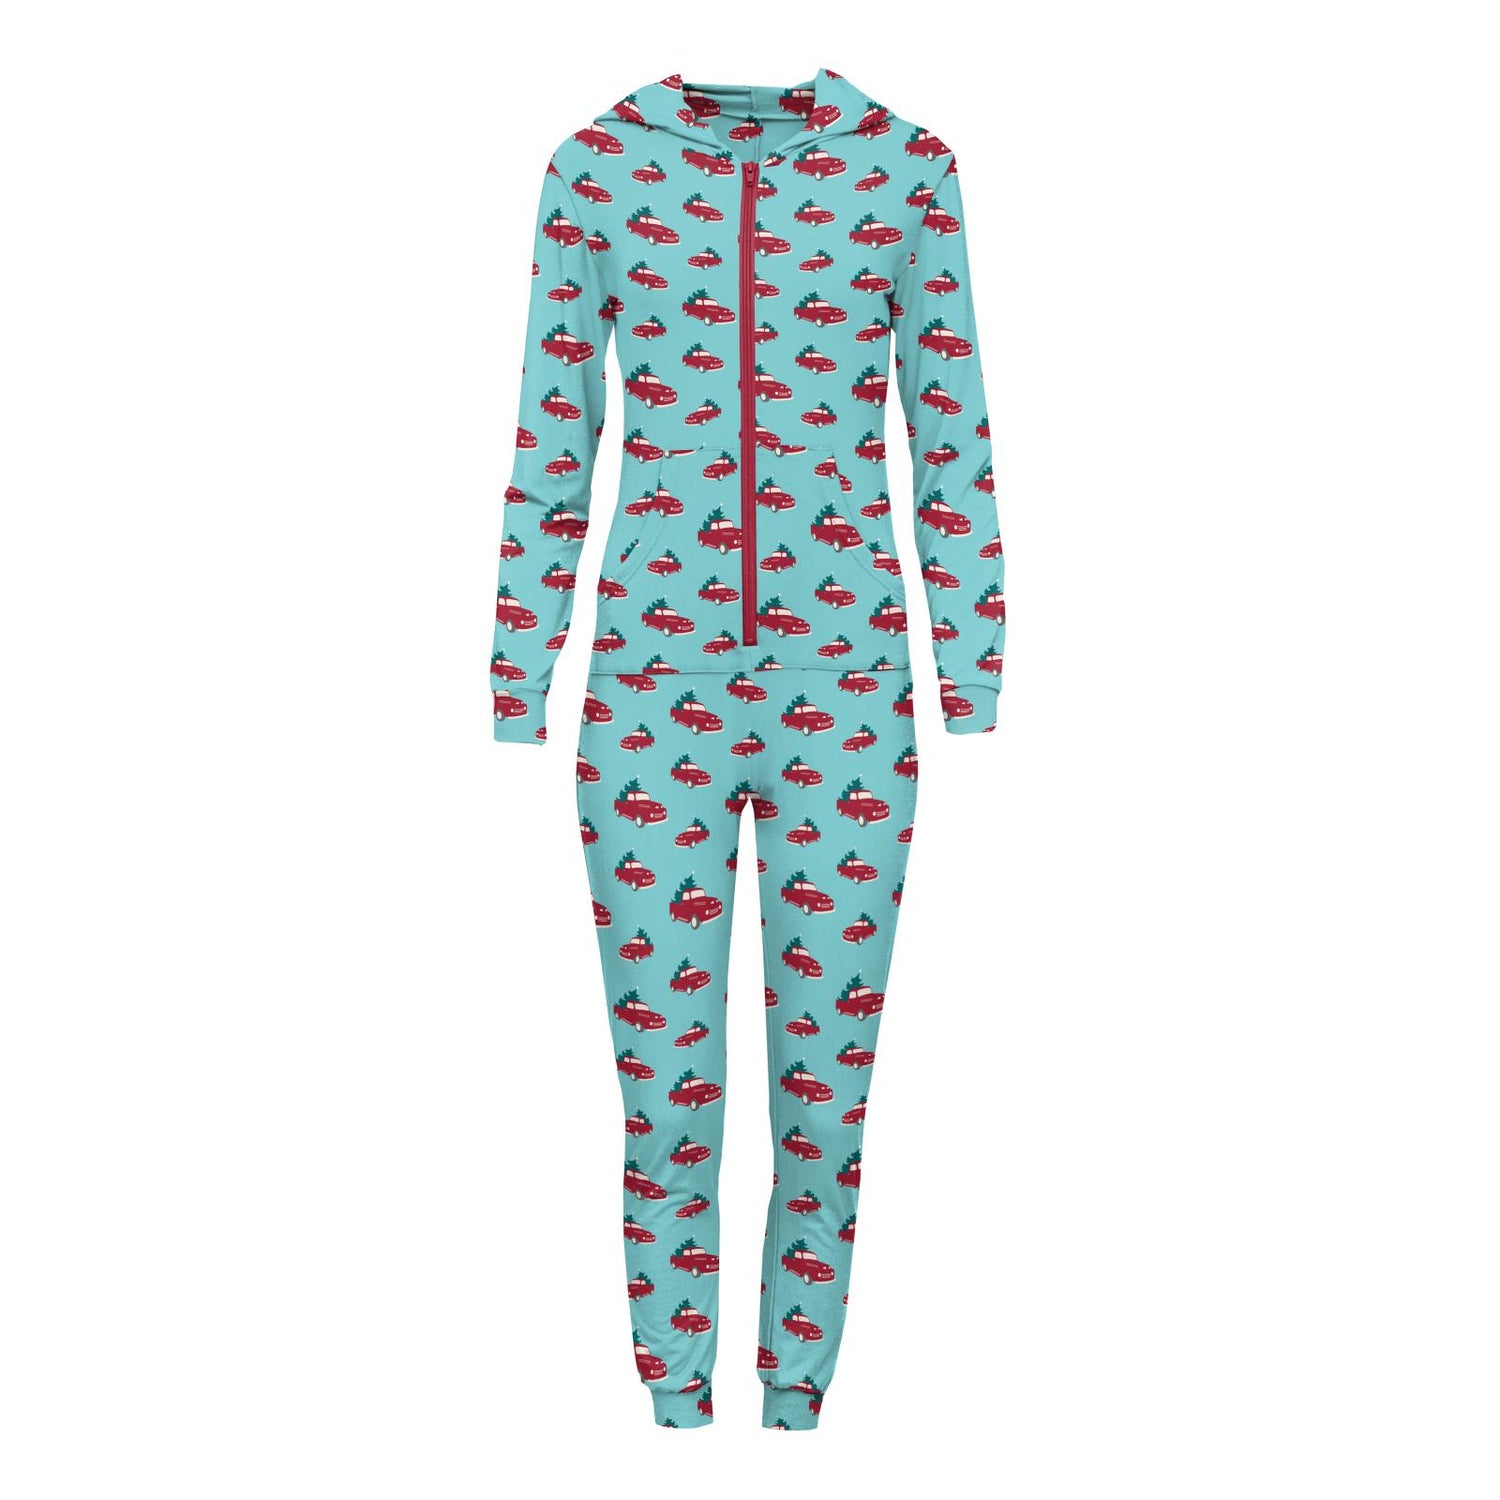 Women's Print Long Sleeve Jumpsuit with Hood in Iceberg Trucks and Trees